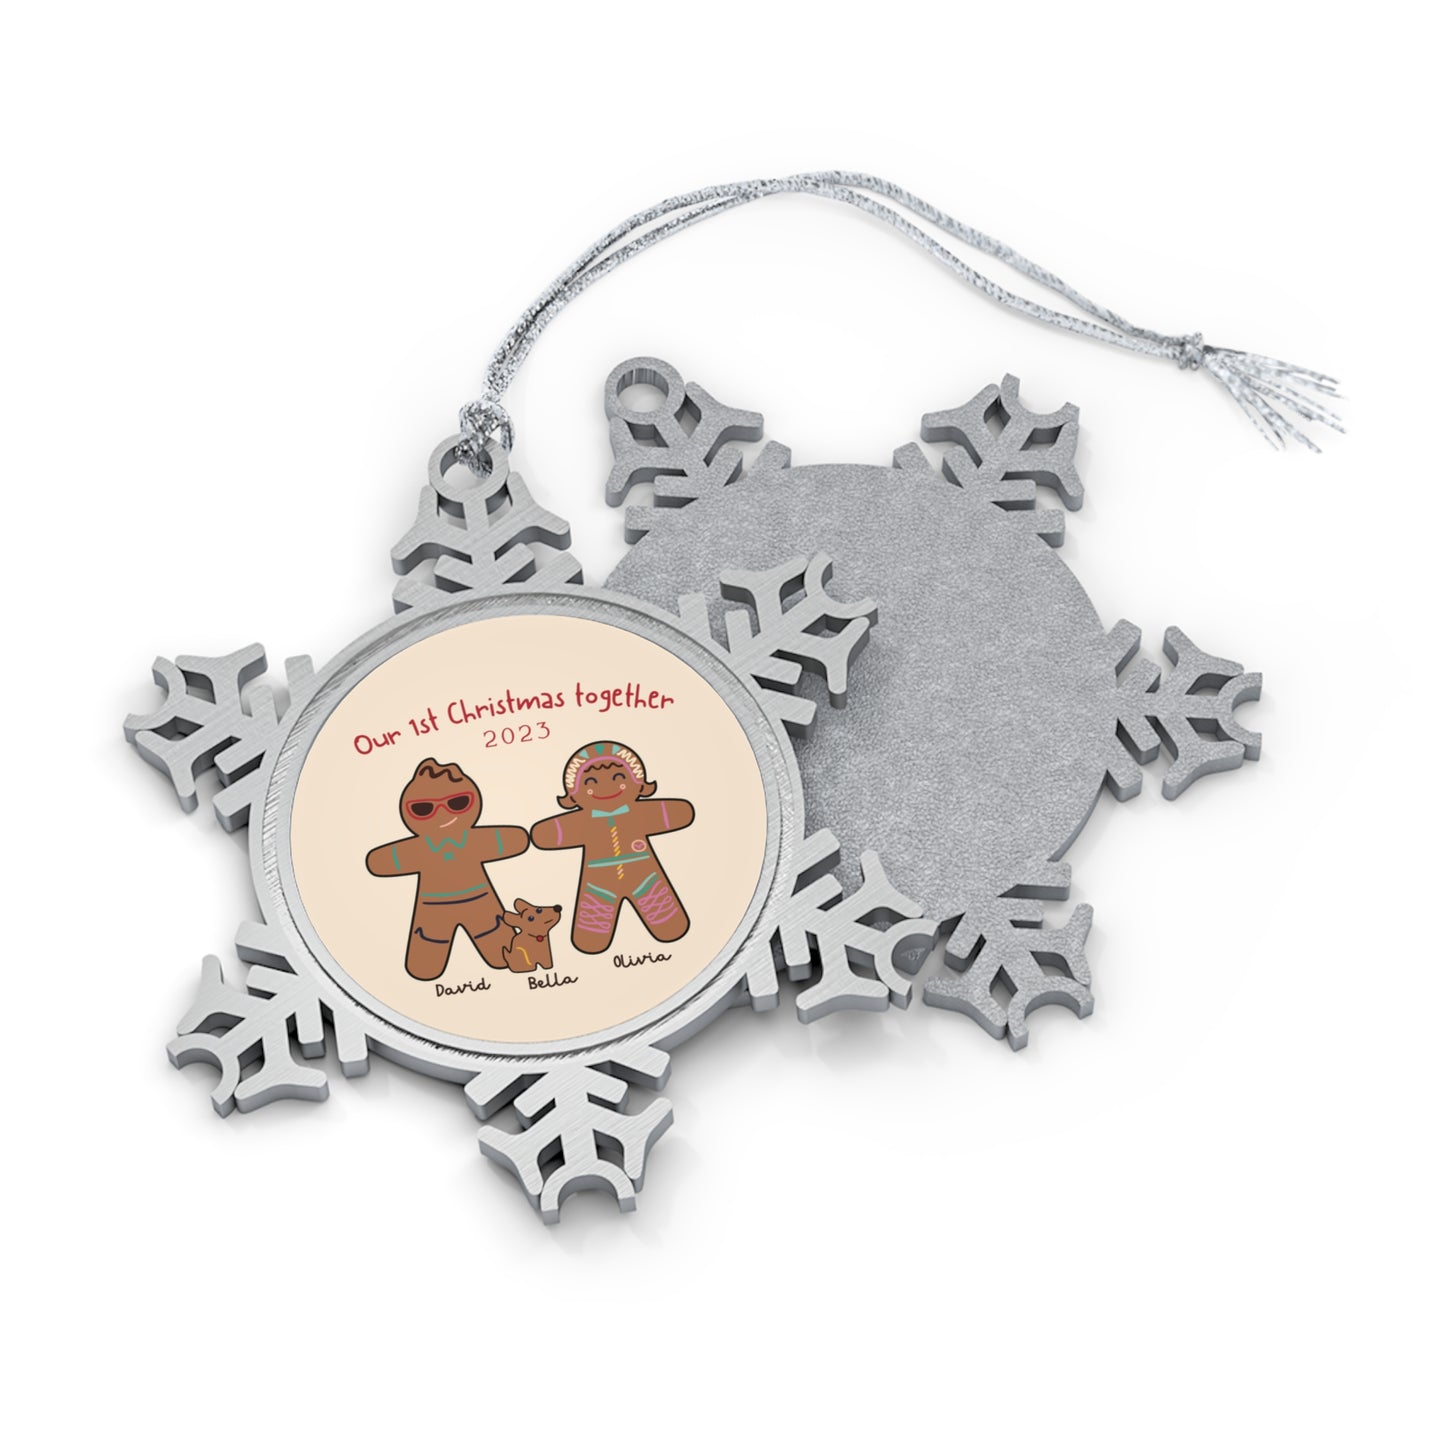 Personalised Pewter Snowflake Ornament | Gingerbread Men Couple with Dog